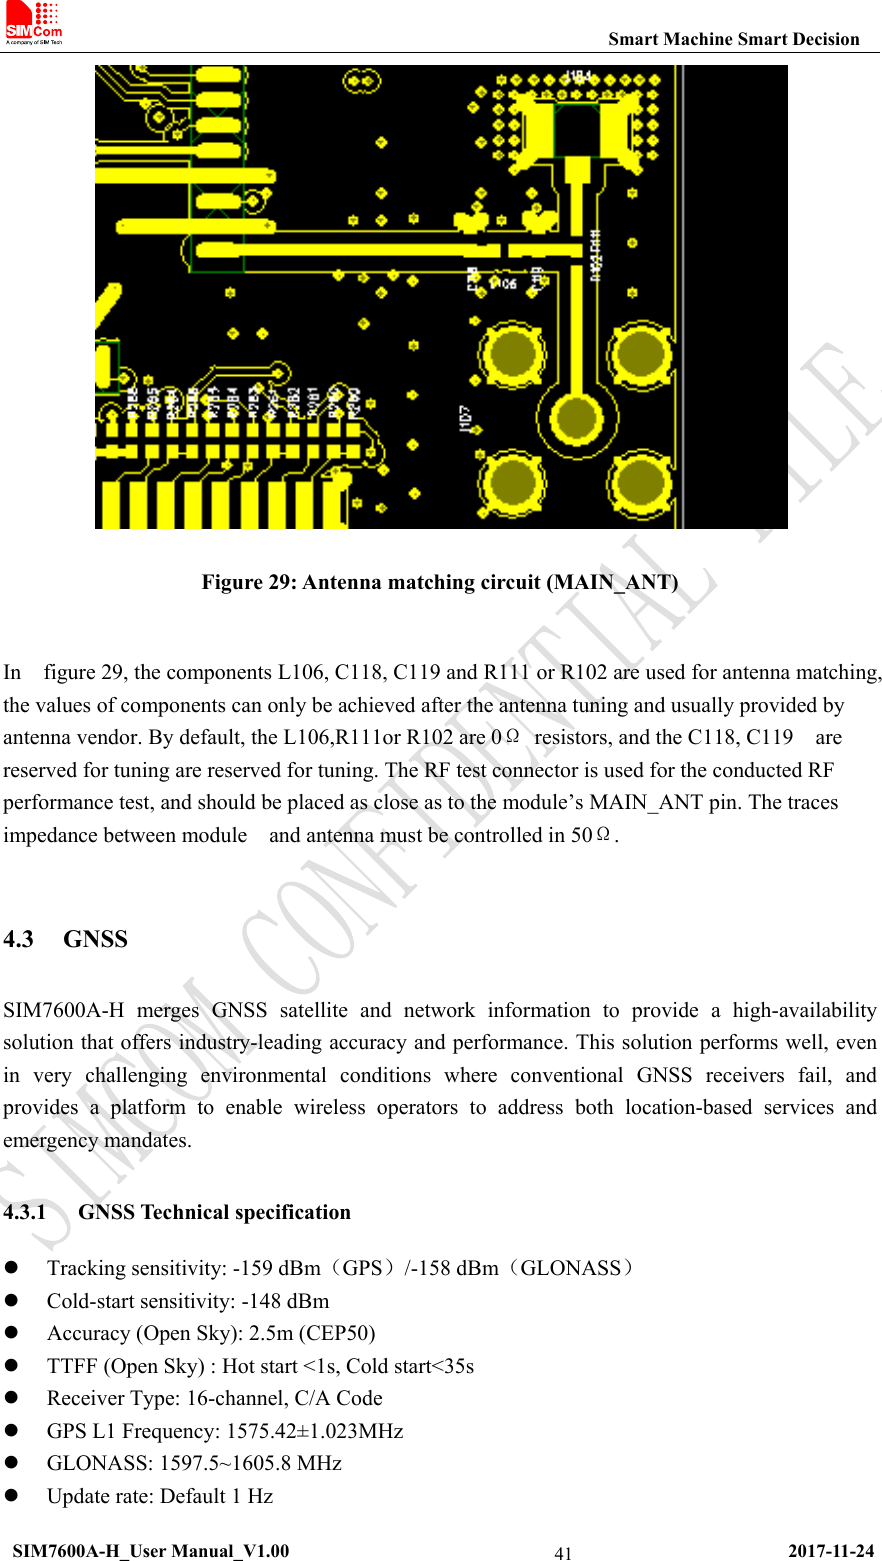                                                           Smart Machine Smart Decision  SIM7600A-H_User Manual_V1.00                                                     2017-11-24 41 Figure 29: Antenna matching circuit (MAIN_ANT)  In    figure 29, the components L106, C118, C119 and R111 or R102 are used for antenna matching, the values of components can only be achieved after the antenna tuning and usually provided by antenna vendor. By default, the L106,R111or R102 are 0Ω  resistors, and the C118, C119    are reserved for tuning are reserved for tuning. The RF test connector is used for the conducted RF performance test, and should be placed as close as to the module’s MAIN_ANT pin. The traces impedance between module    and antenna must be controlled in 50Ω.  4.3 GNSS SIM7600A-H merges GNSS satellite and network information to provide a high-availability solution that offers industry-leading accuracy and performance. This solution performs well, even in very challenging environmental conditions where conventional GNSS receivers fail, and provides a platform to enable wireless operators to address both location-based services and emergency mandates. 4.3.1 GNSS Technical specification  Tracking sensitivity: -159 dBm（GPS）/-158 dBm（GLONASS）  Cold-start sensitivity: -148 dBm  Accuracy (Open Sky): 2.5m (CEP50)  TTFF (Open Sky) : Hot start &lt;1s, Cold start&lt;35s  Receiver Type: 16-channel, C/A Code  GPS L1 Frequency: 1575.42±1.023MHz  GLONASS: 1597.5~1605.8 MHz  Update rate: Default 1 Hz 